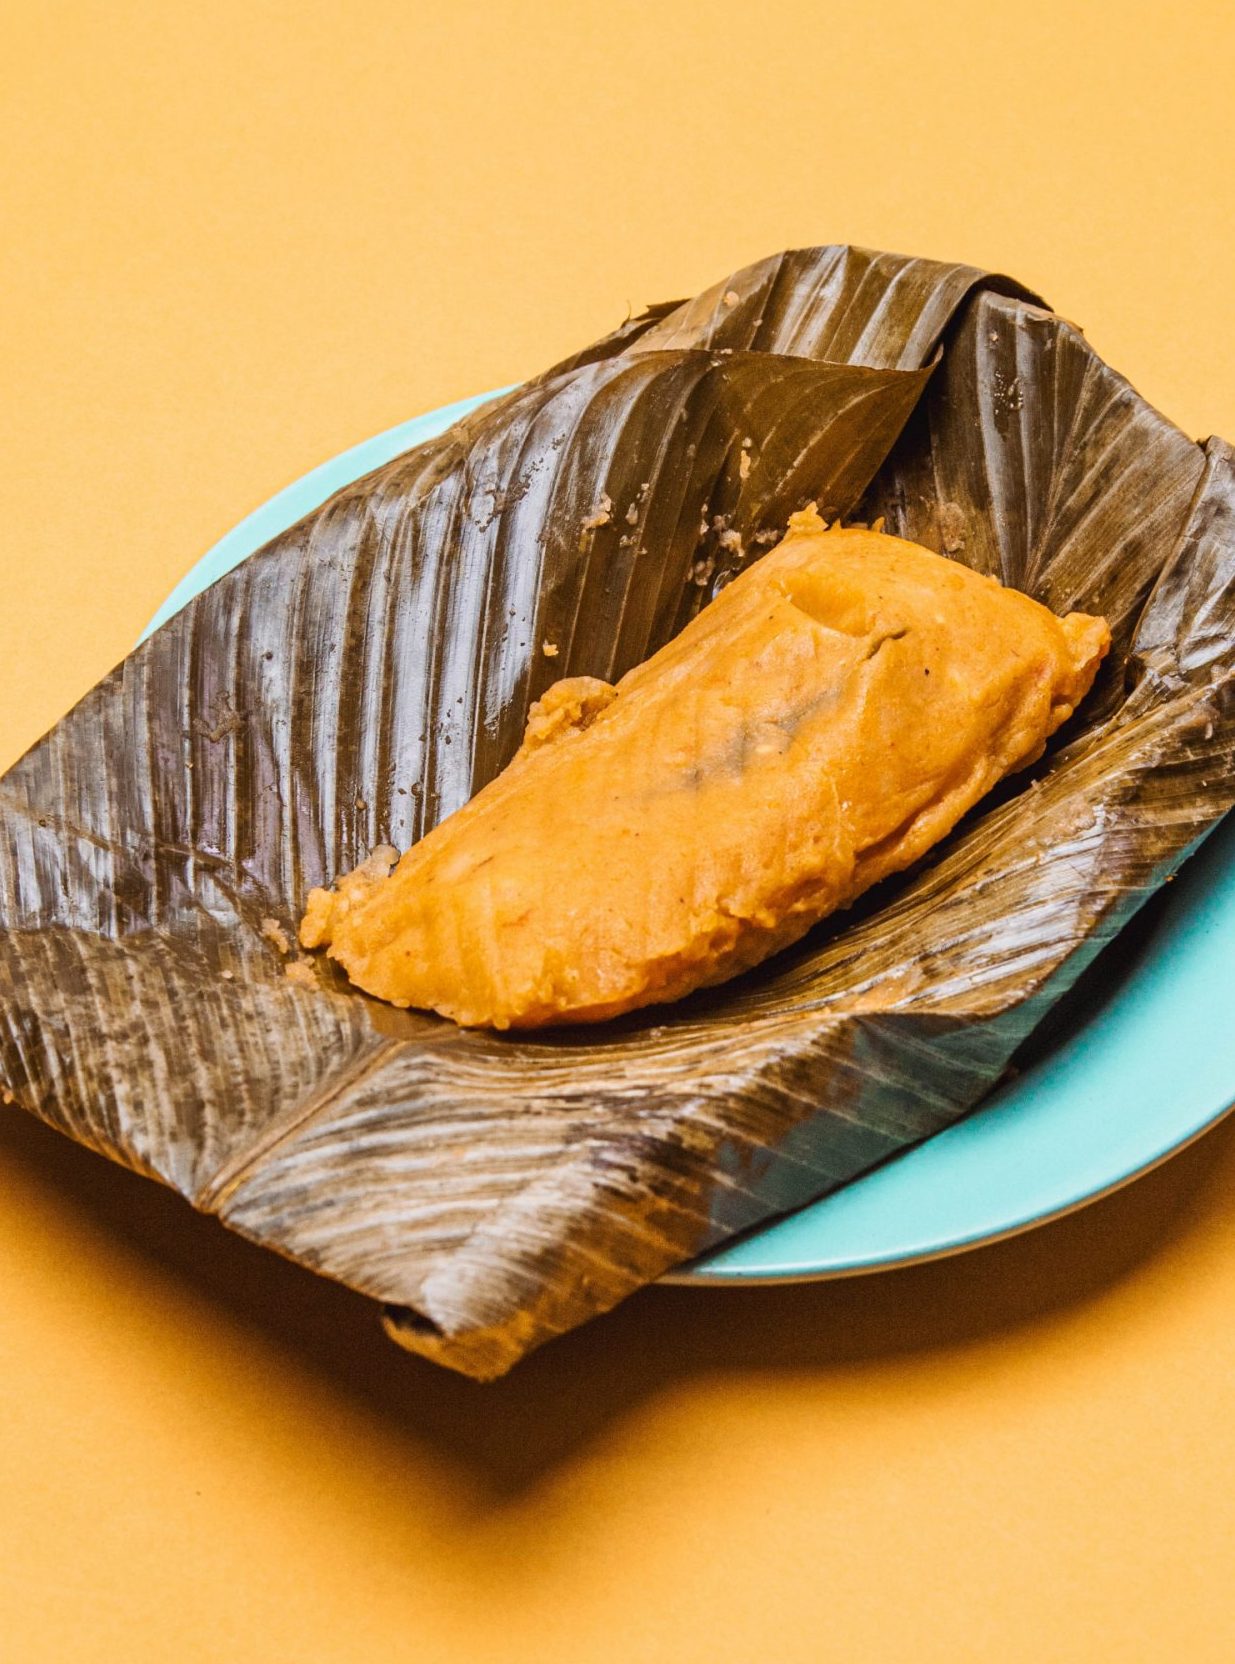 How to make Guatemalan paches tamales